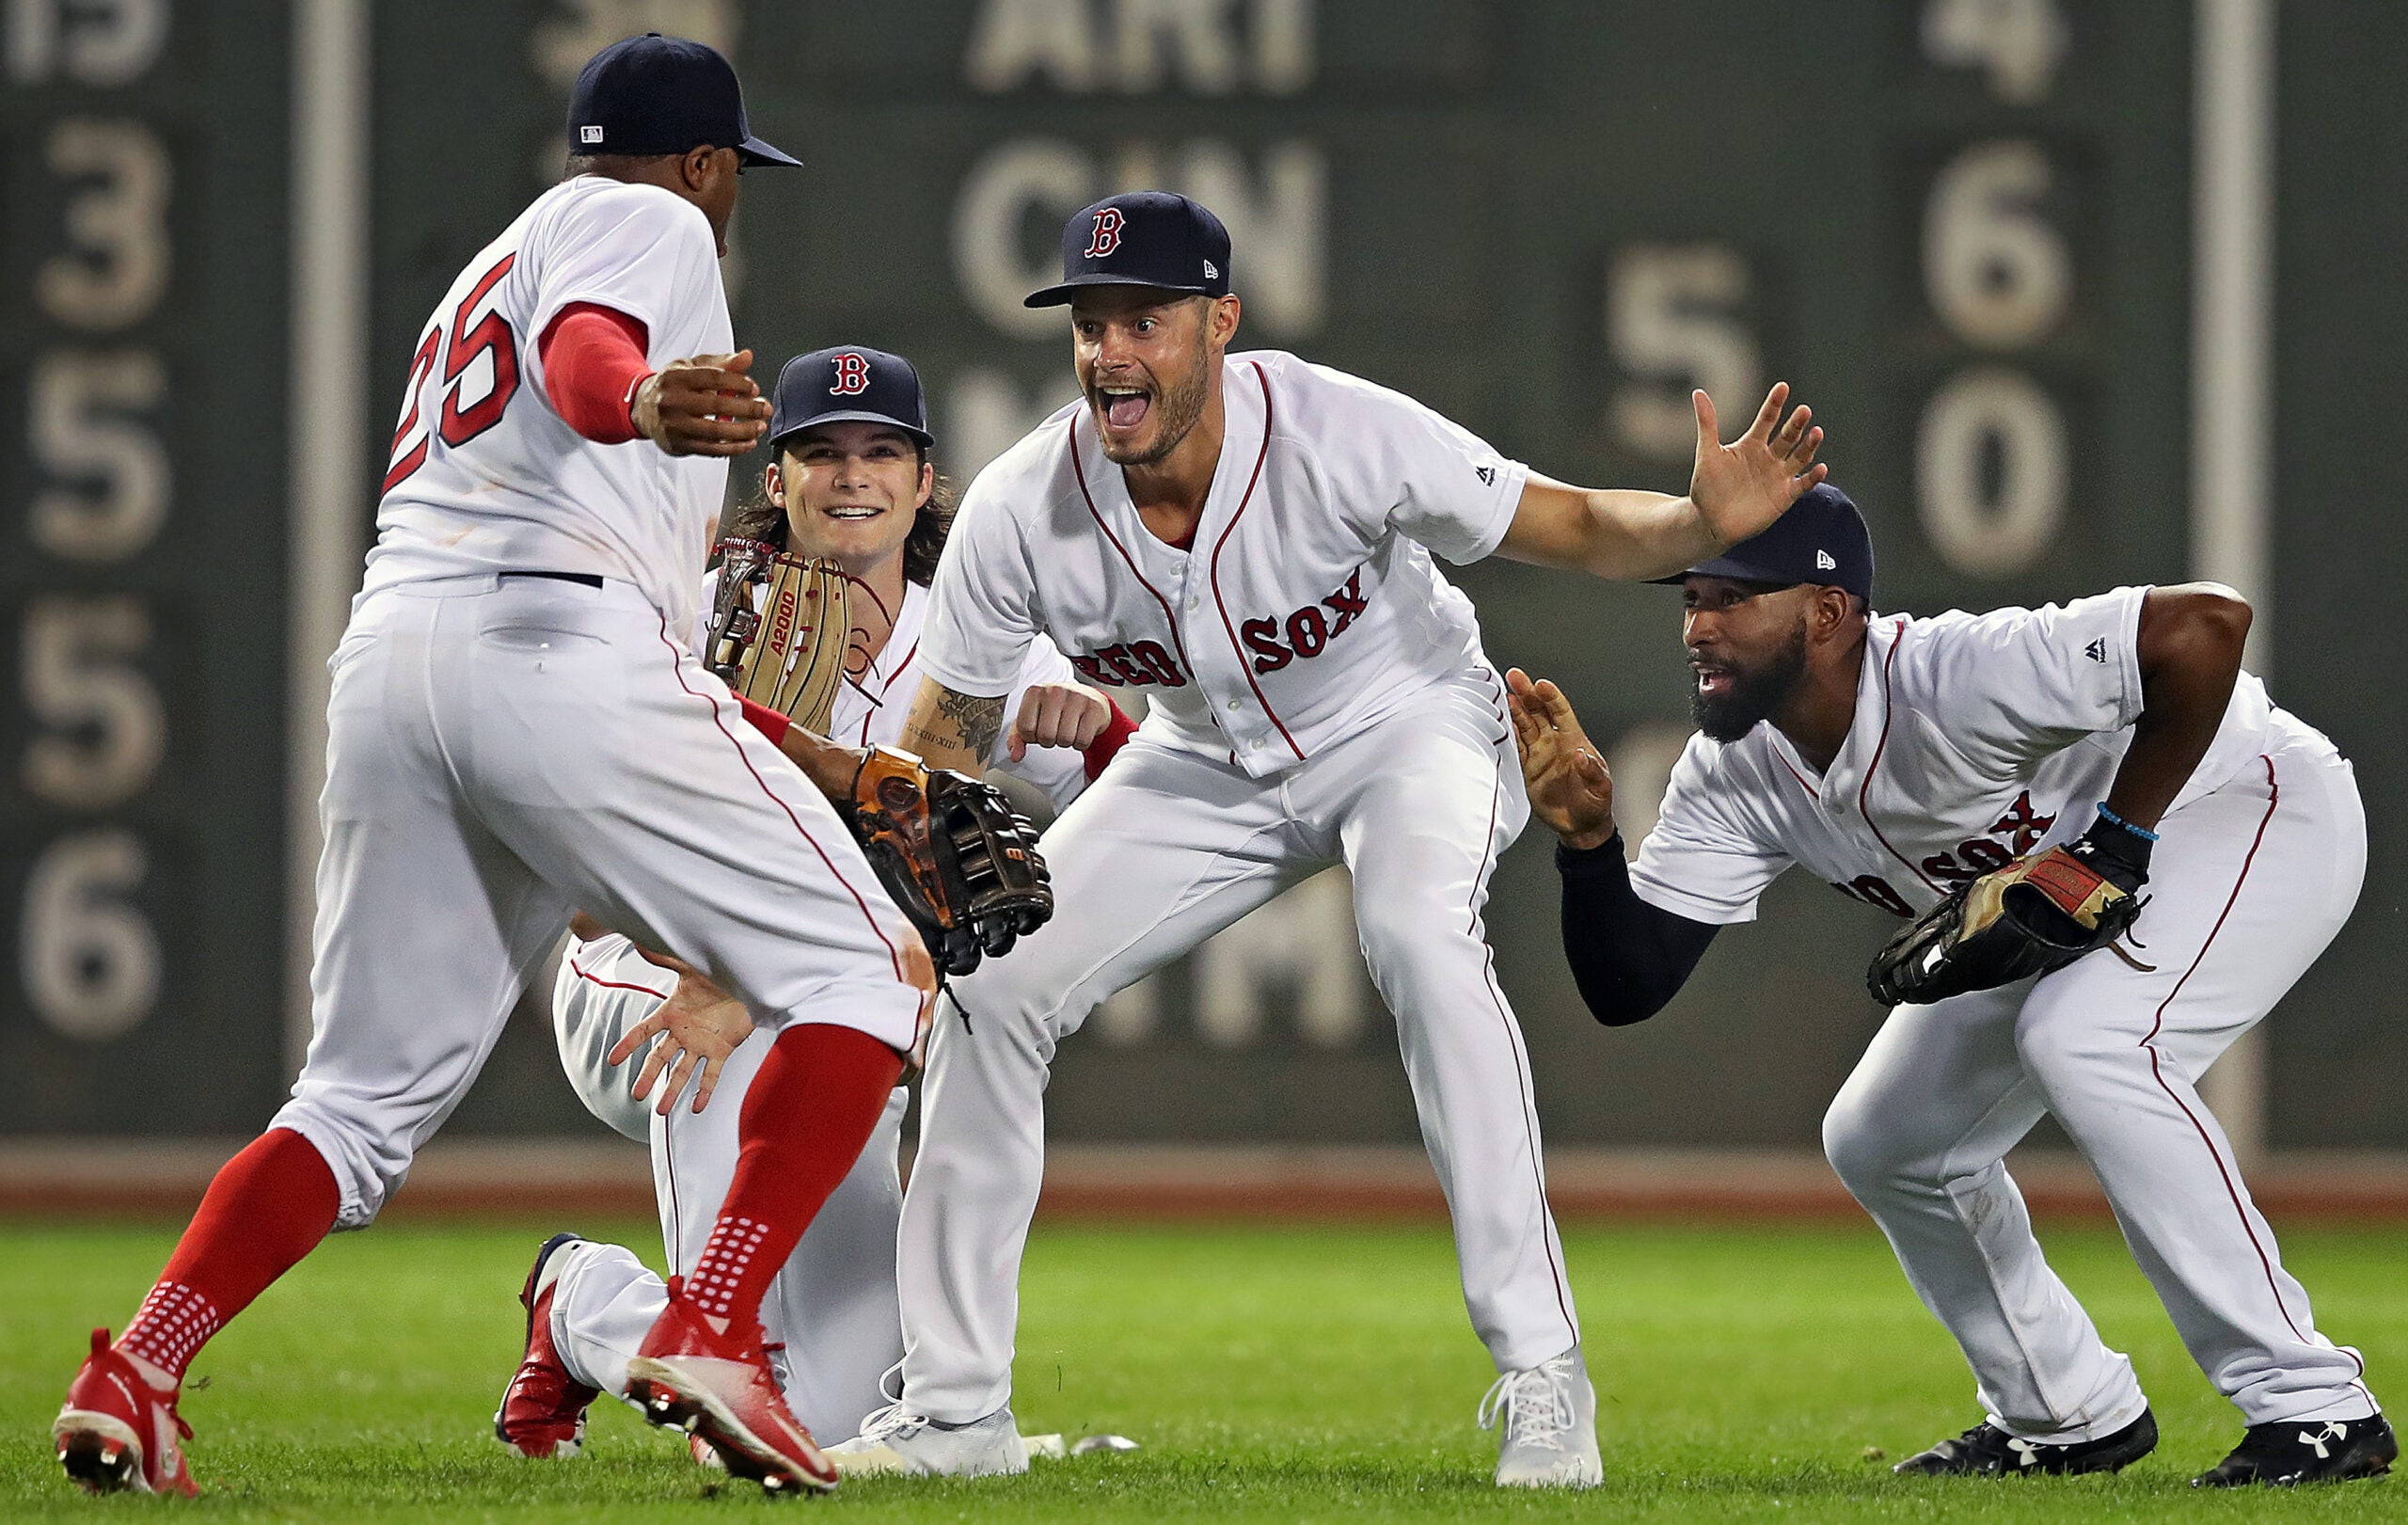 Heres how to watch the Red Sox game Thursday